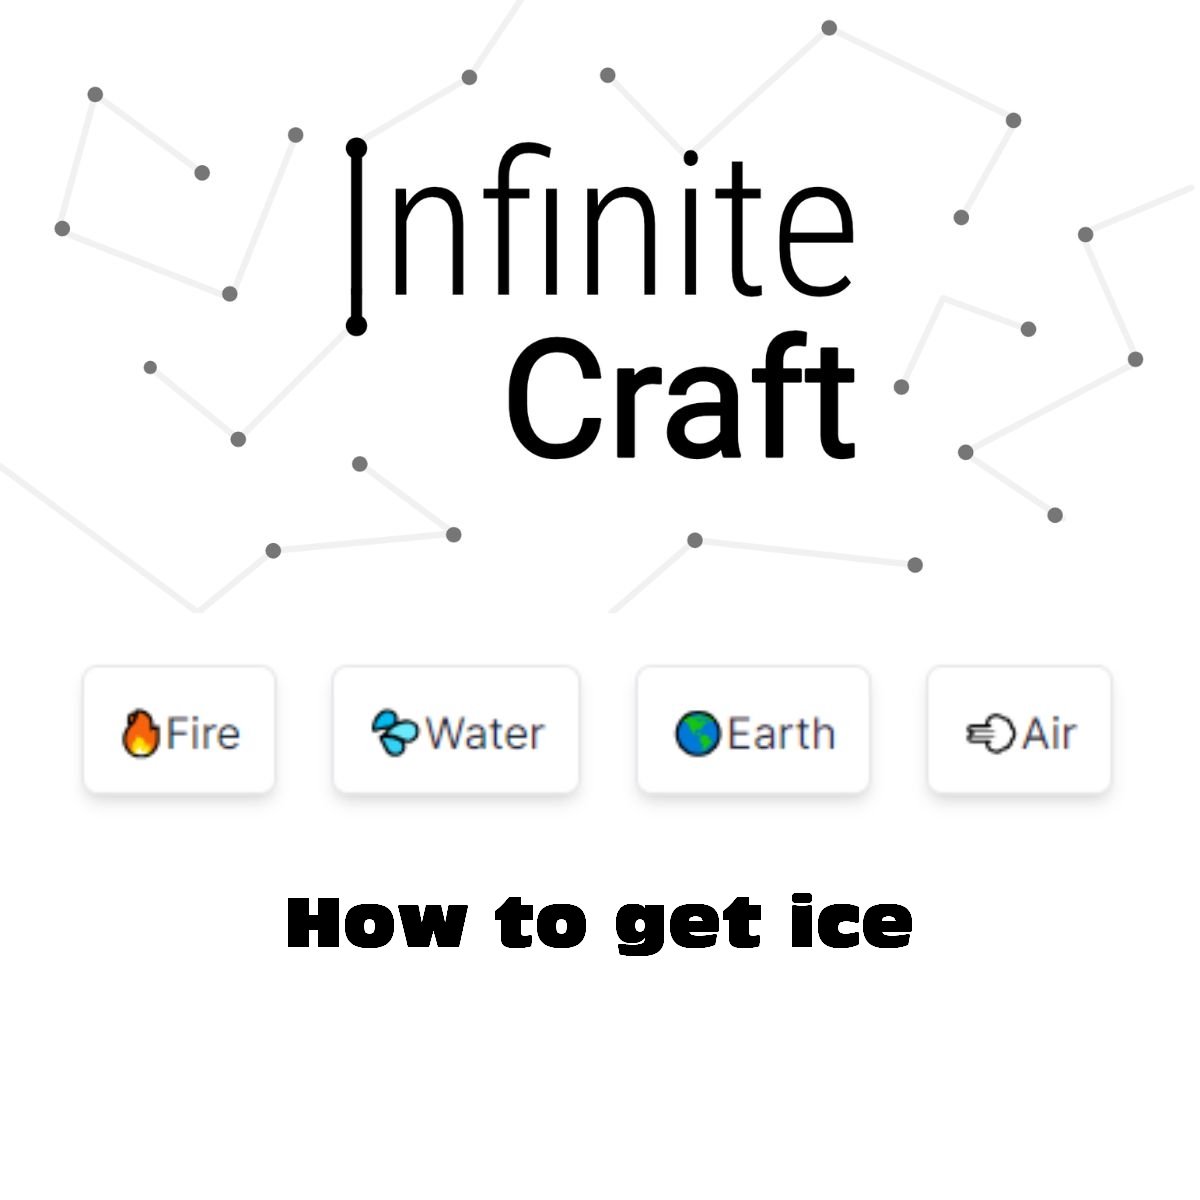 how to get ice in infinite craft